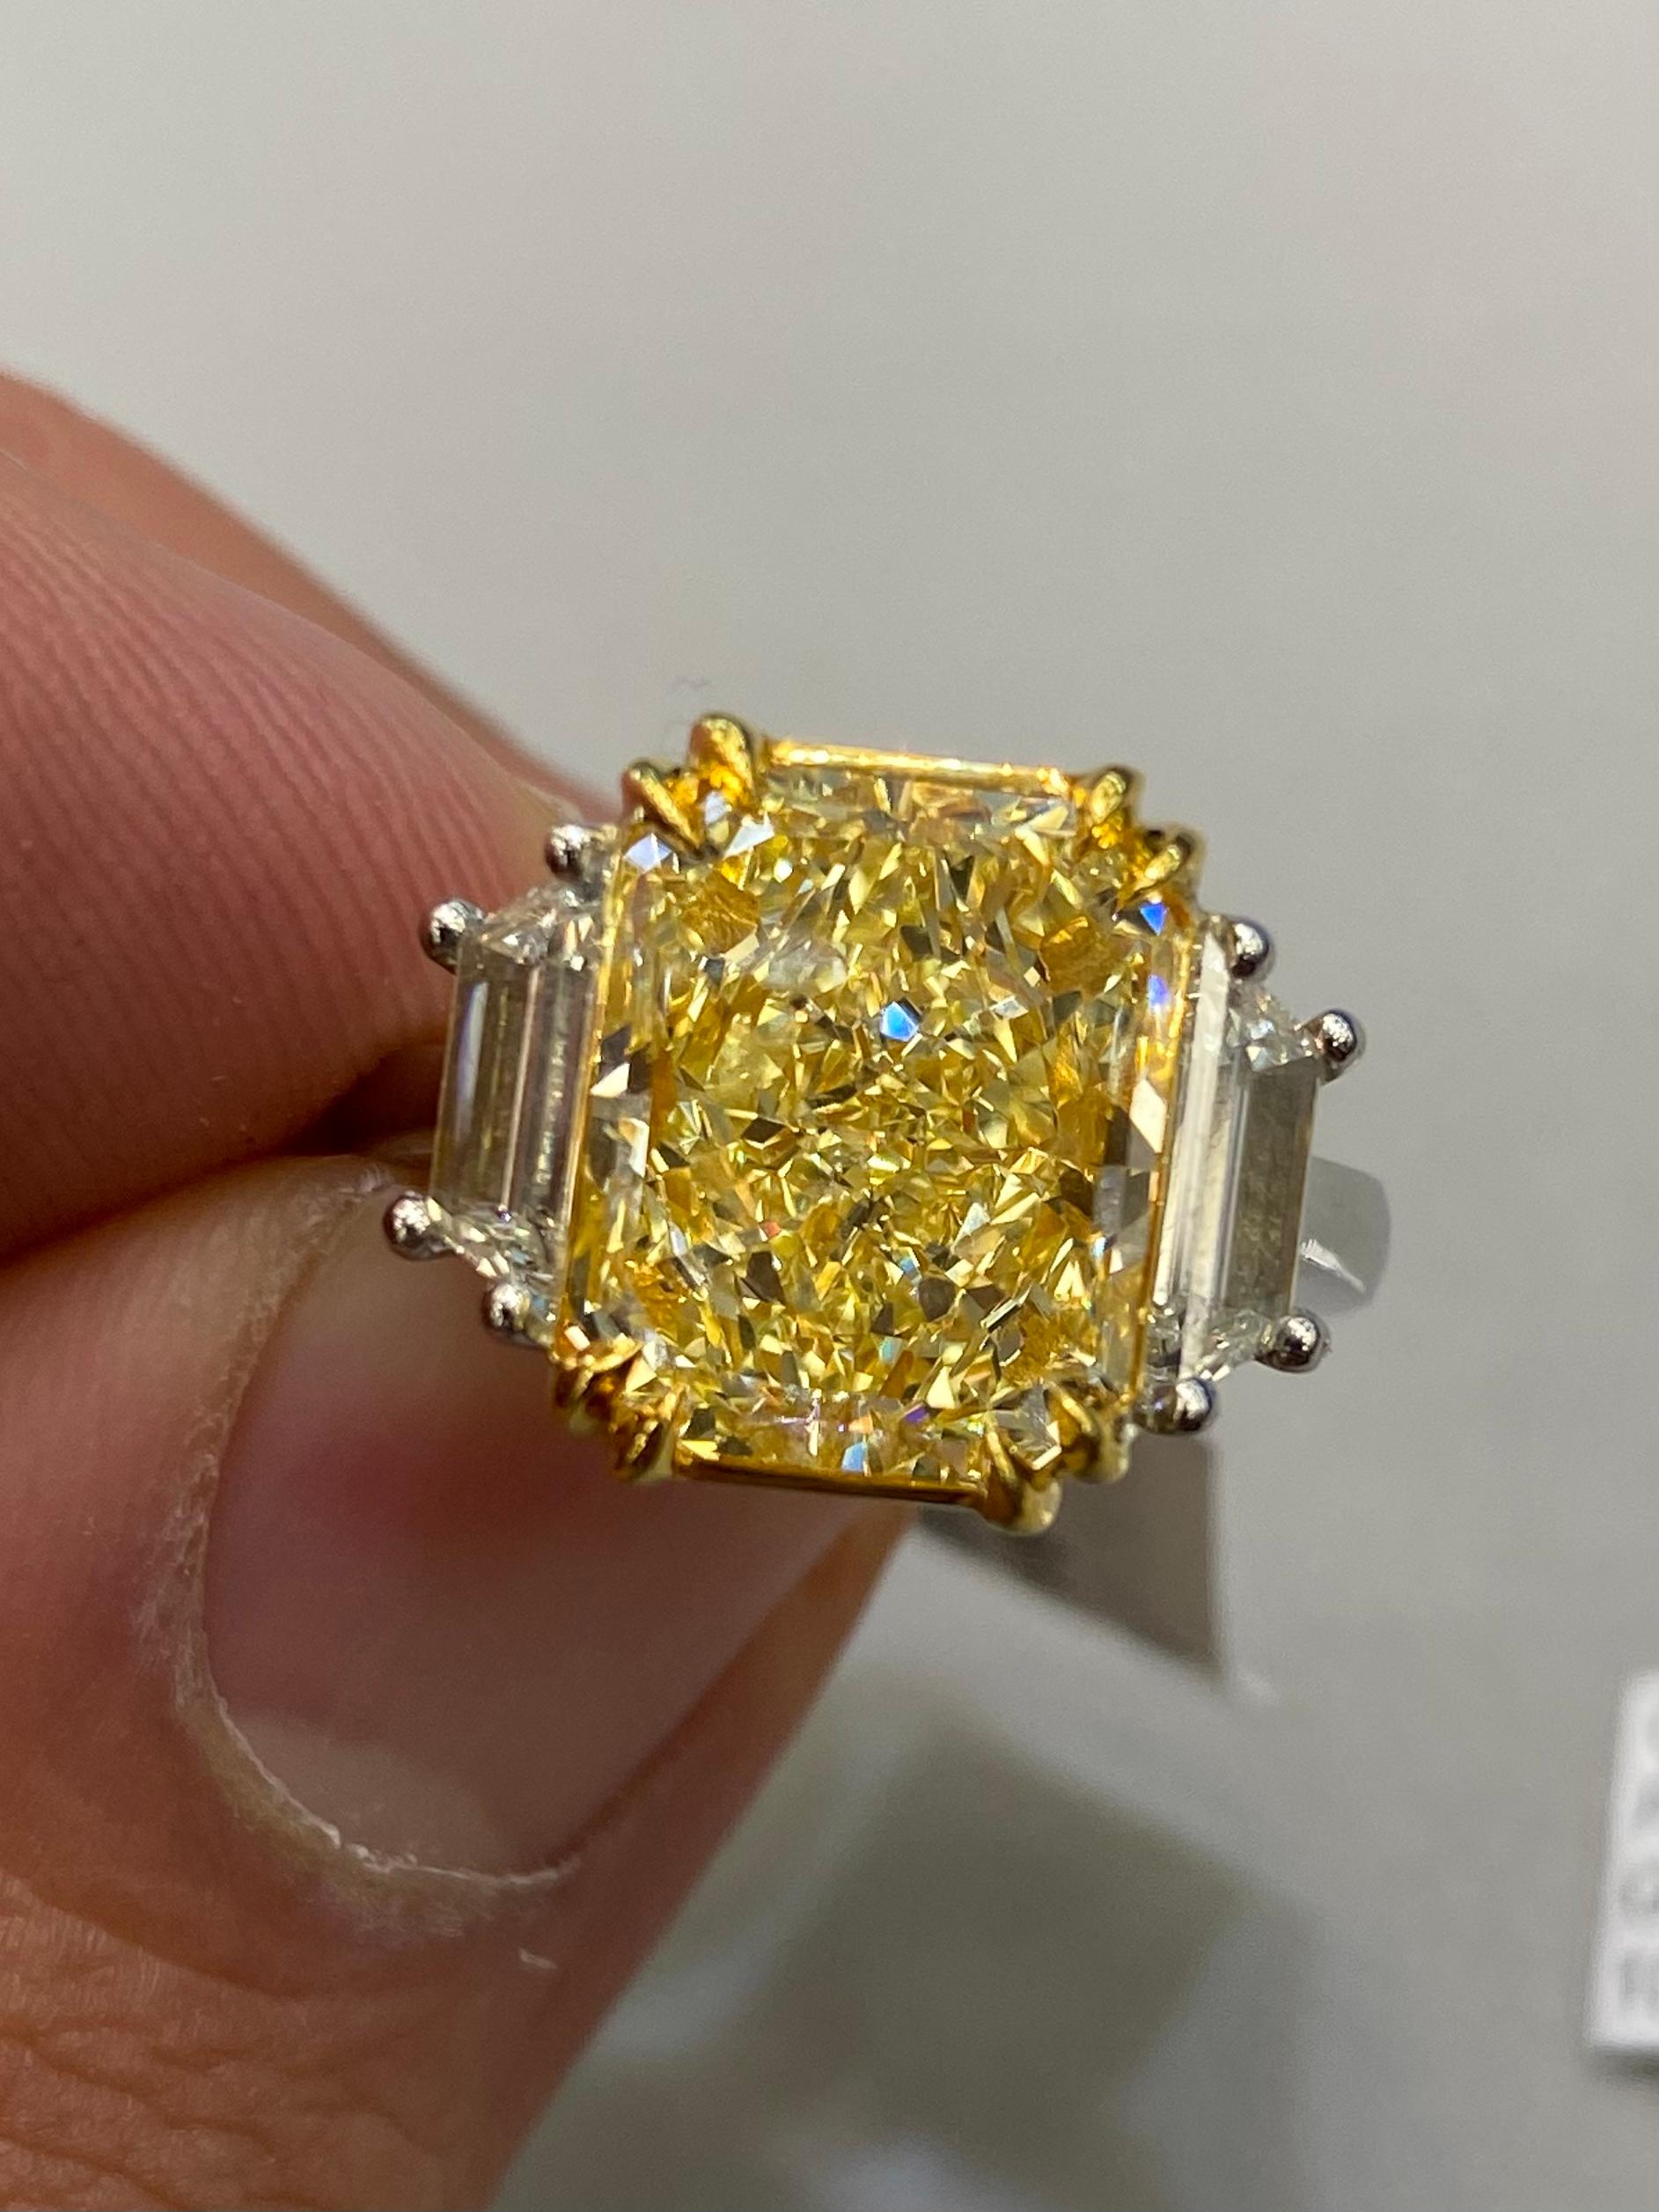 Stunning modern GIA certified fancy yellow internally flawless diamond halo ring, two-tone 18k yellow gold and platinum. 
*Center stone looks like a Fancy Intense Yellow diamond
By Alexander Beverly Hills.
6.38 carats total diamond weight.
5.53